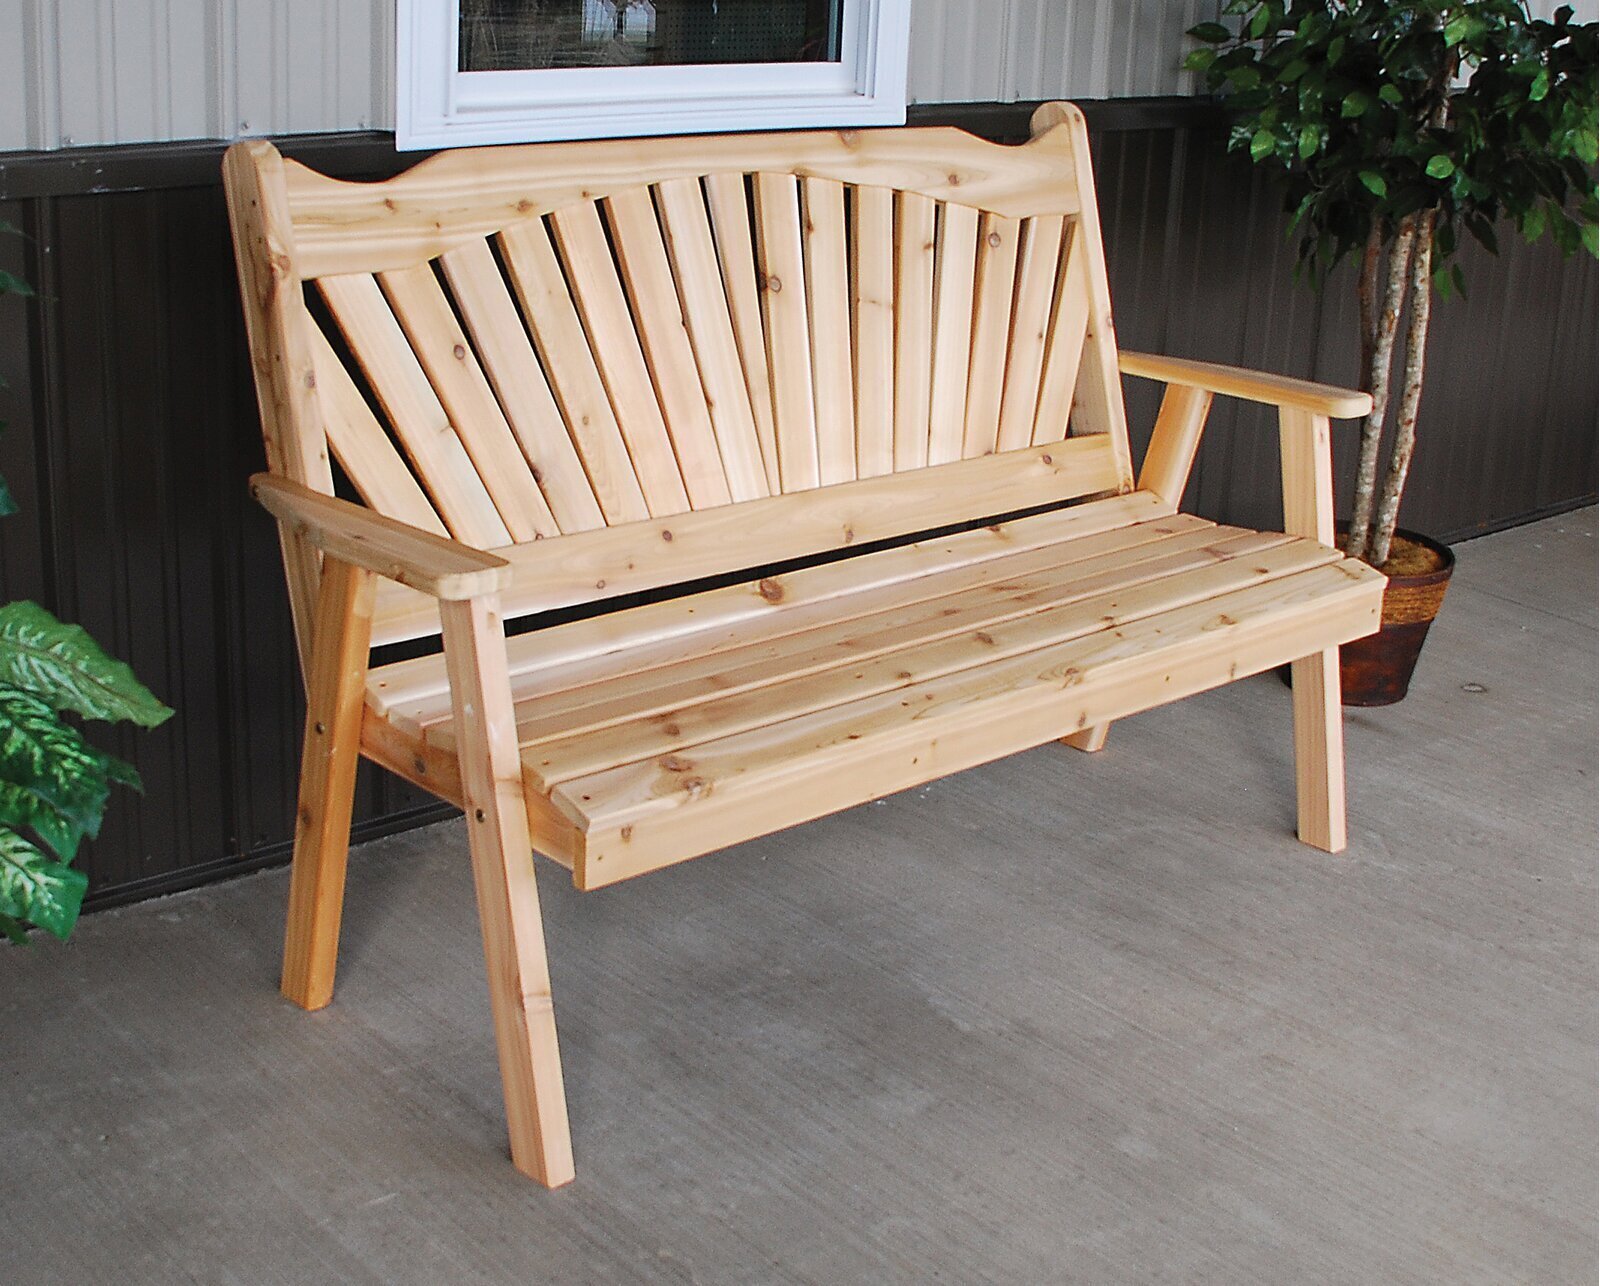 Everything You’re Looking For In A Wooden Garden Bench 